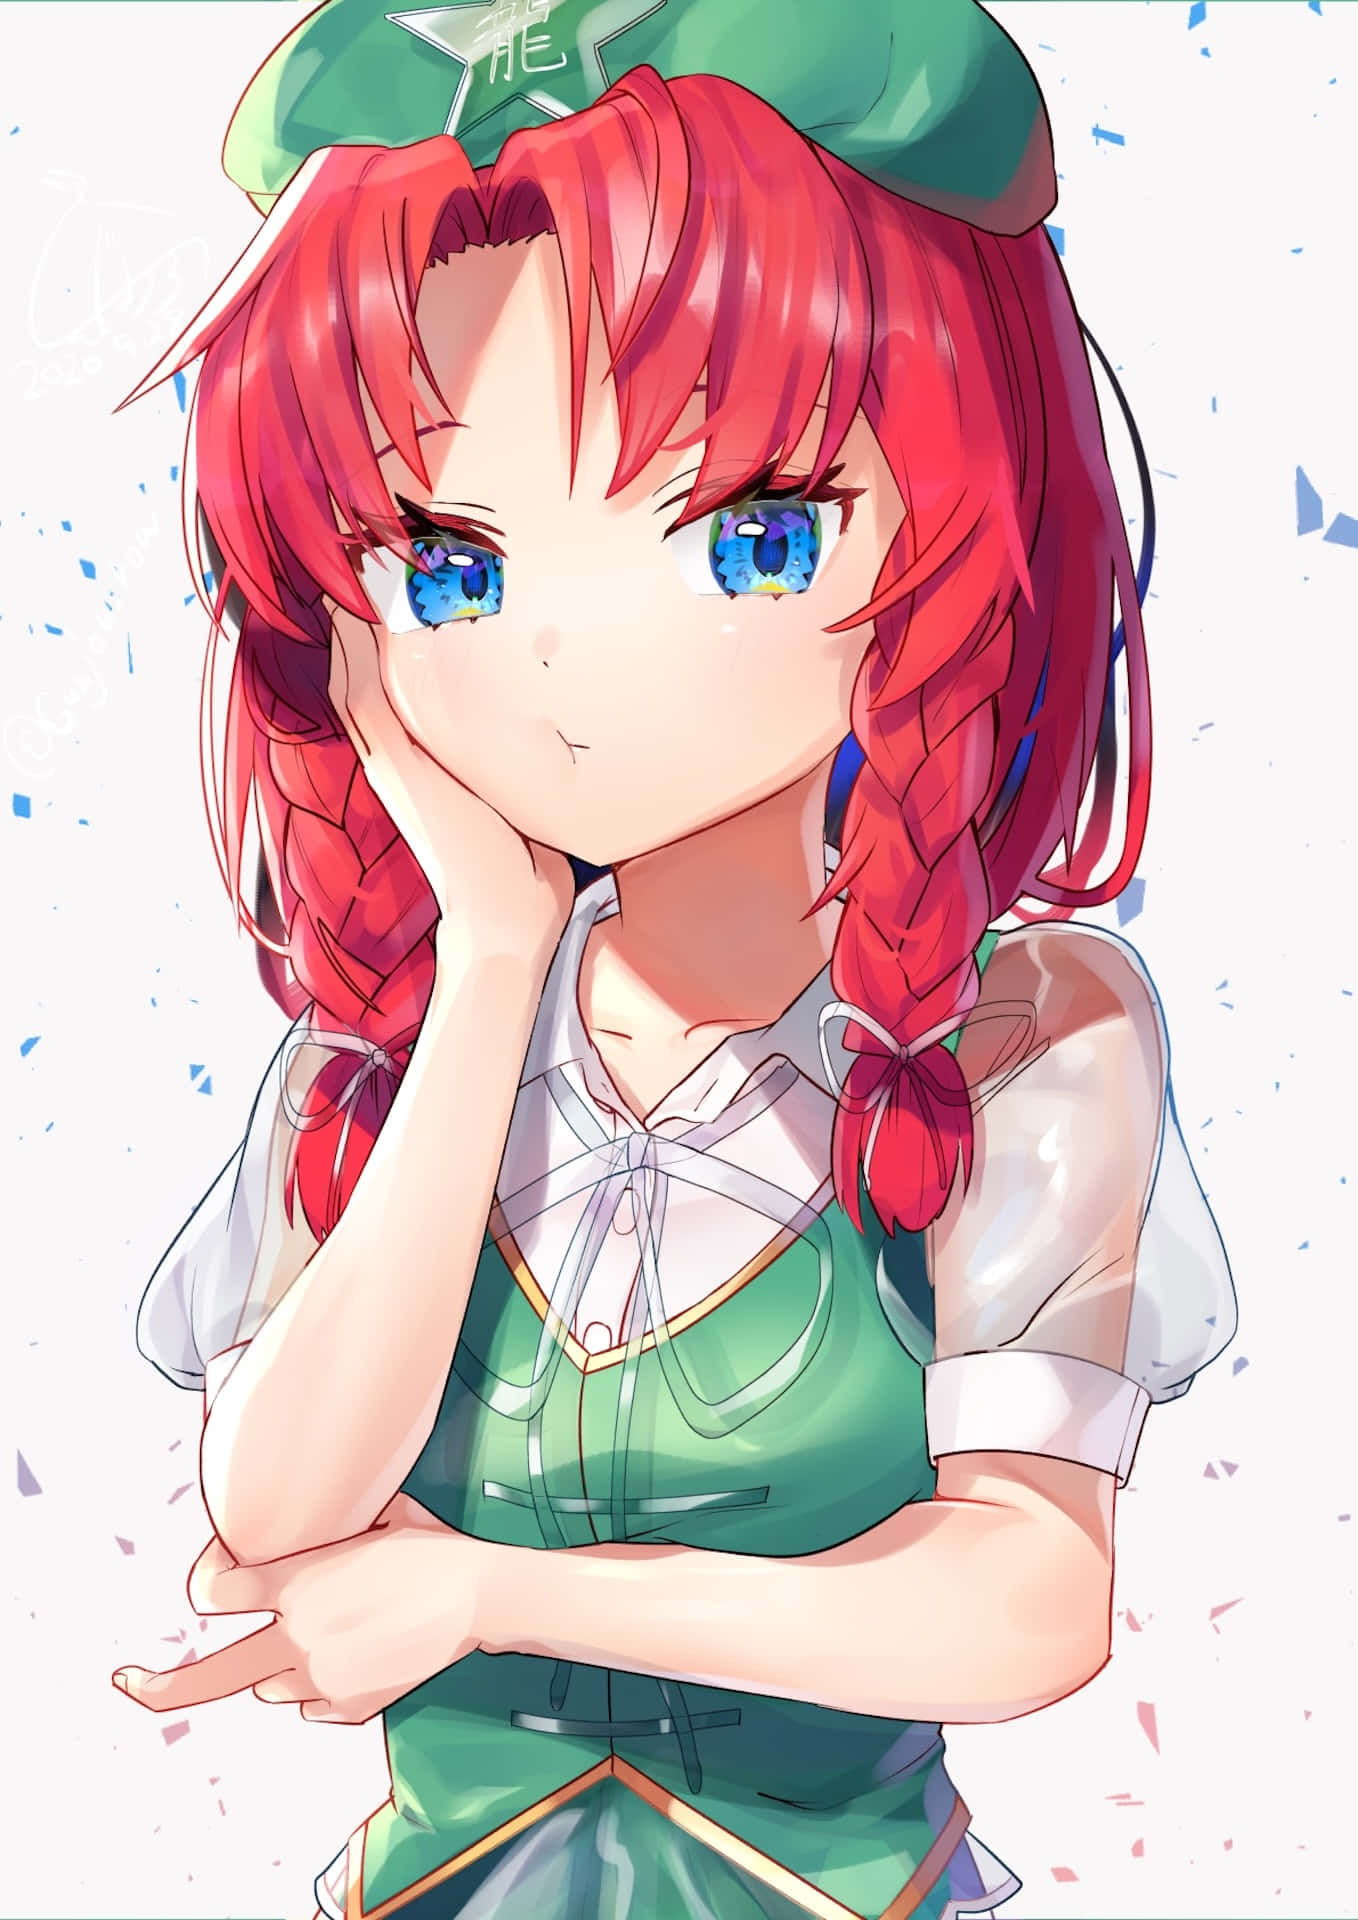 Red Haired Anime Girl With Blue Eyes Wallpaper